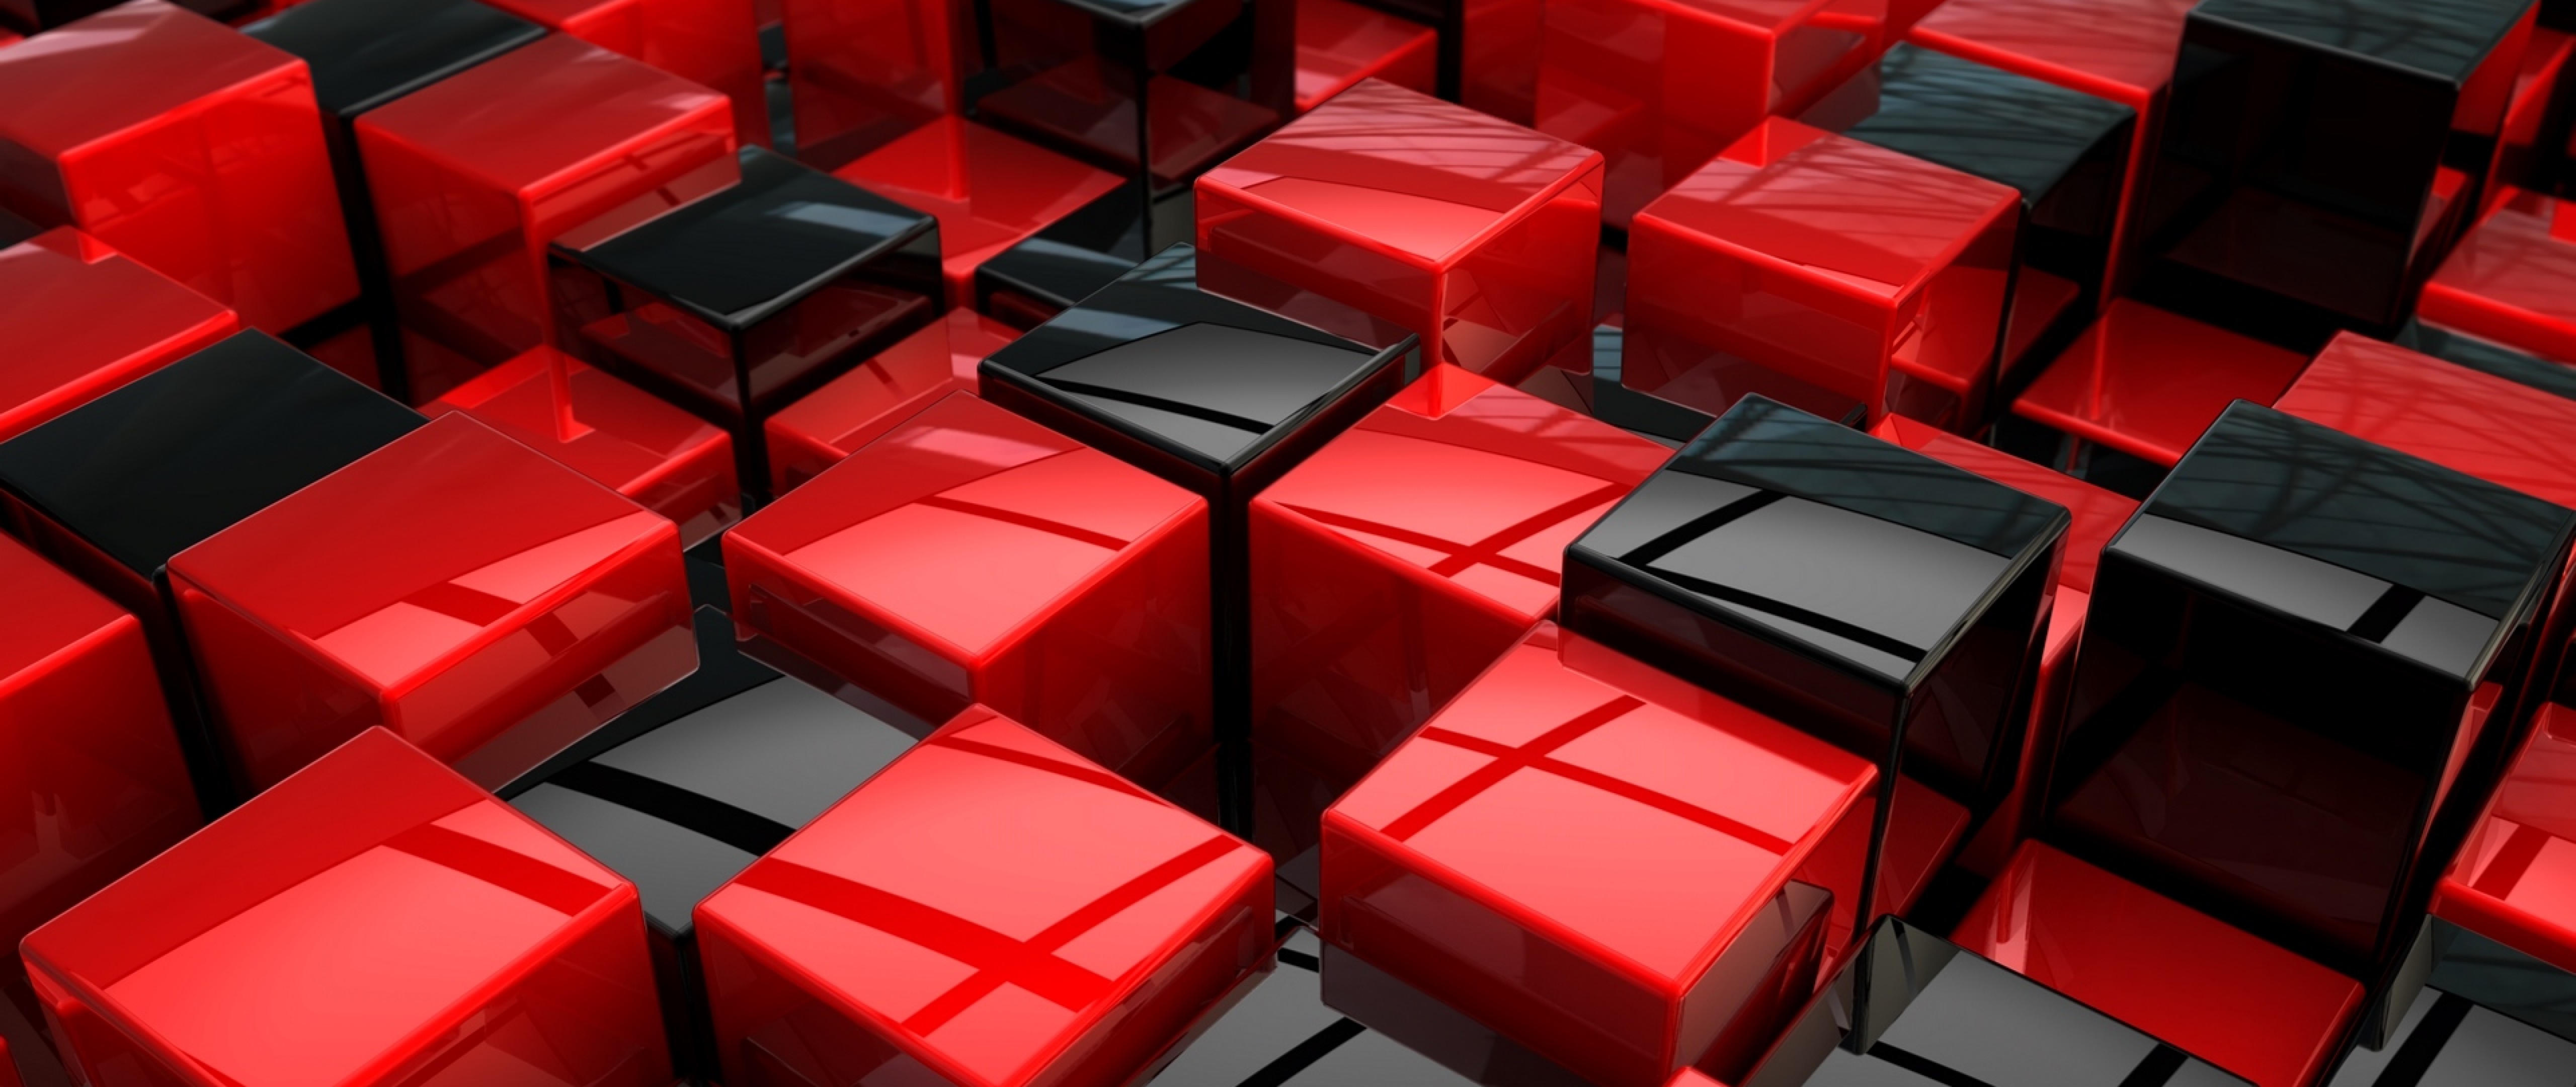 Red and black cubes HD Wallpaper 4K Ultra HD Wide TV